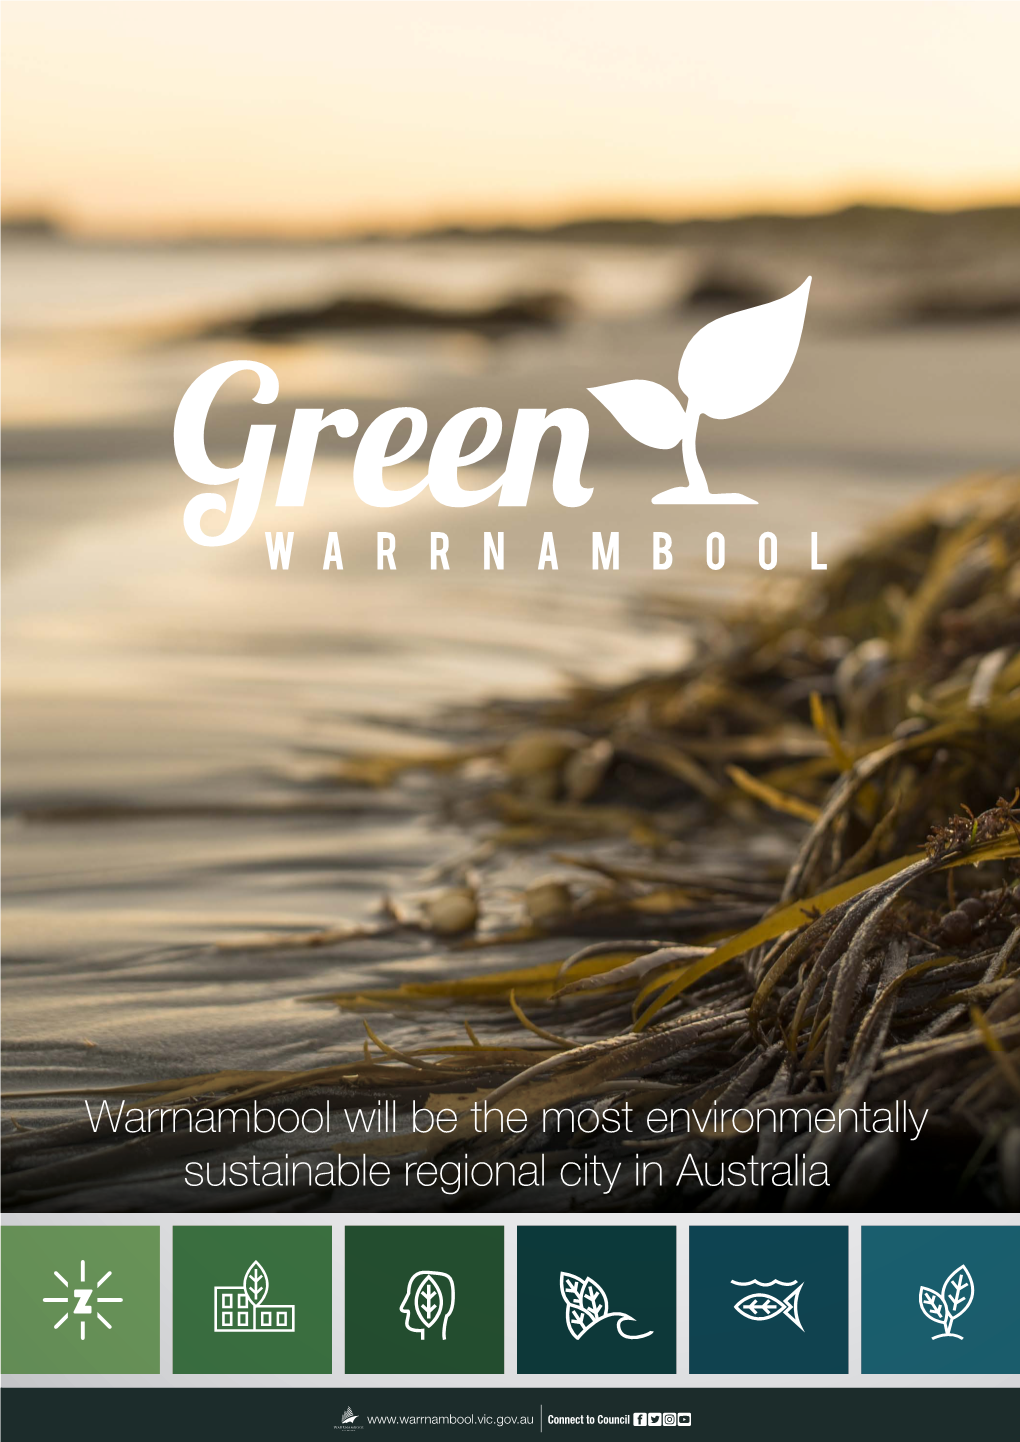 Warrnambool Will Be the Most Environmentally Sustainable Regional City in Australia